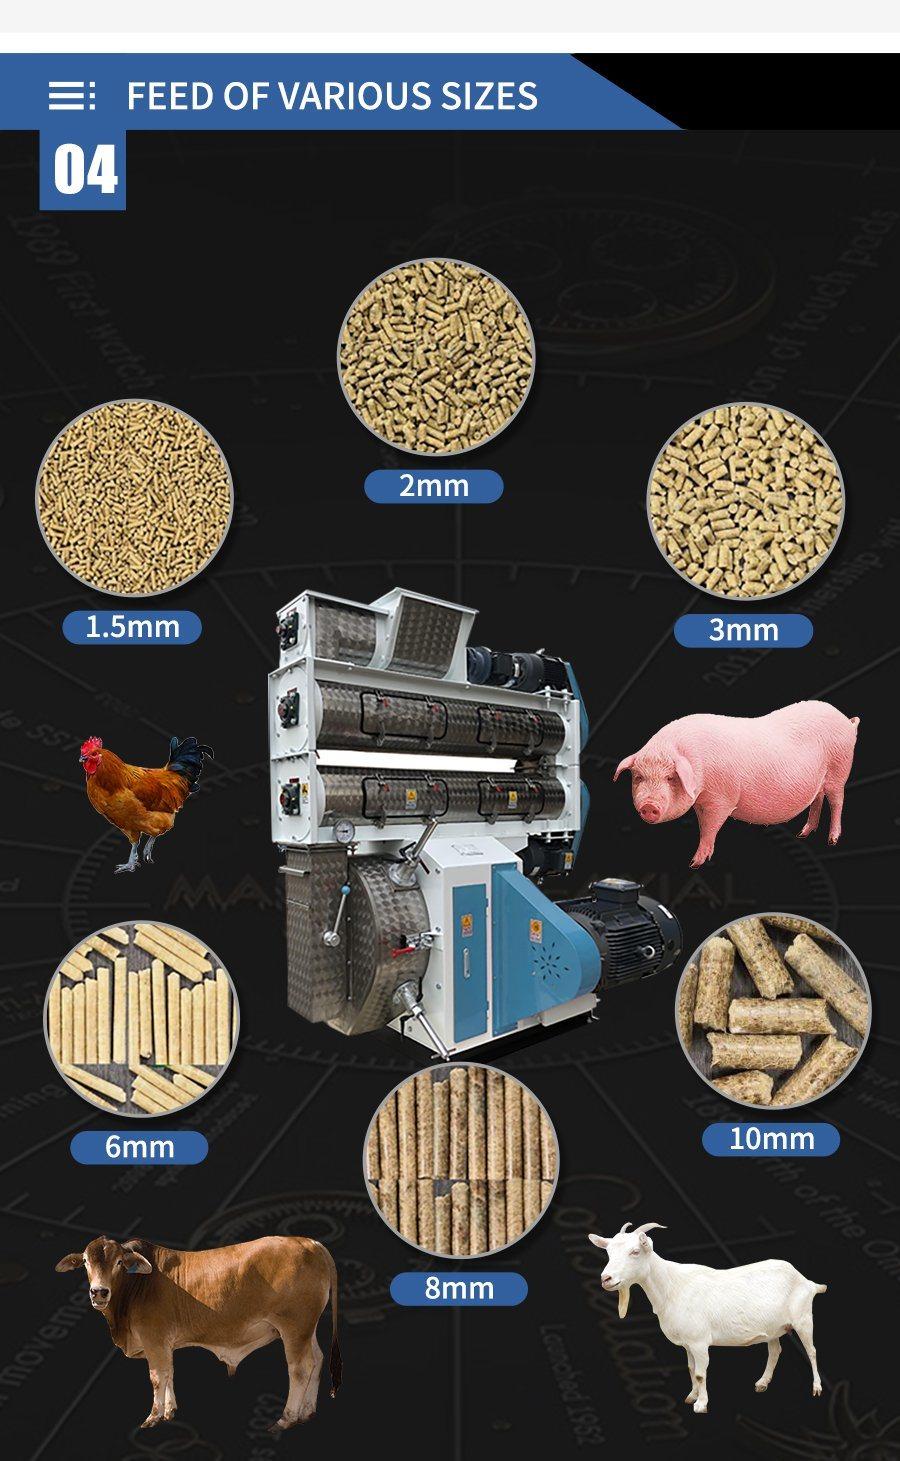 China Manufacture Cattle Chicken Livestock/ Fish Poultry Feed Making Machine as One of Main Feed Machines, CE Certificated Pellet Machine.